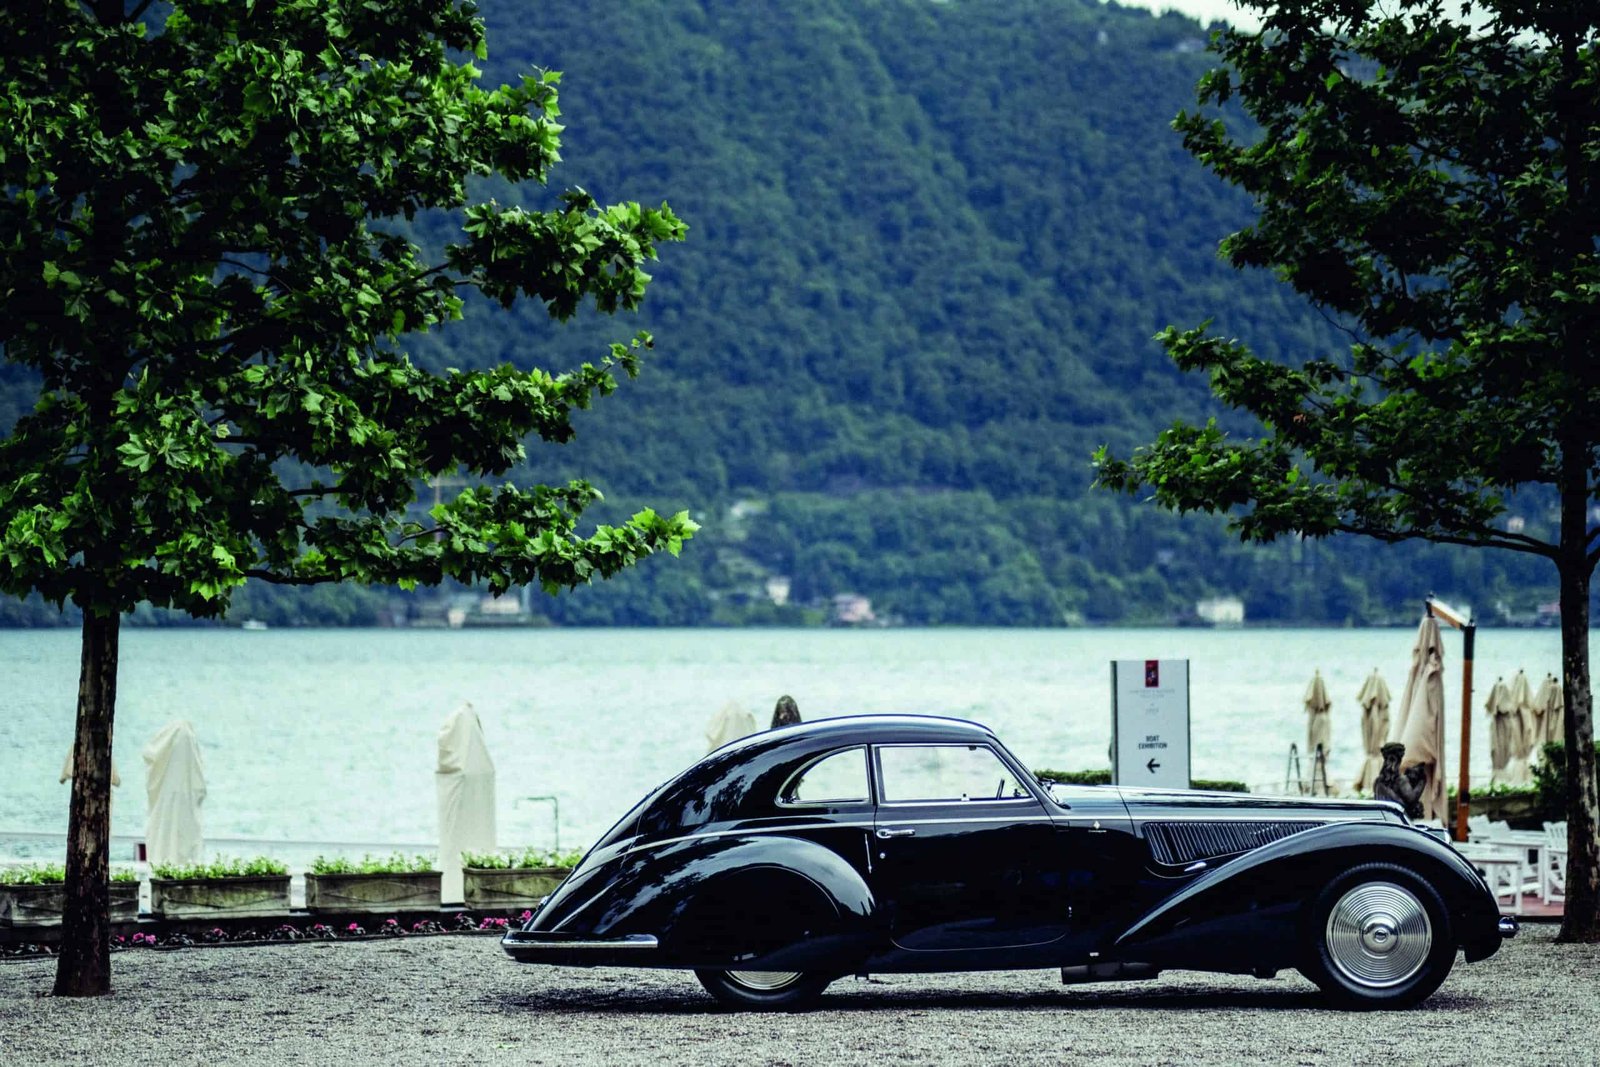 A wind-shaped black car parked by the lake.